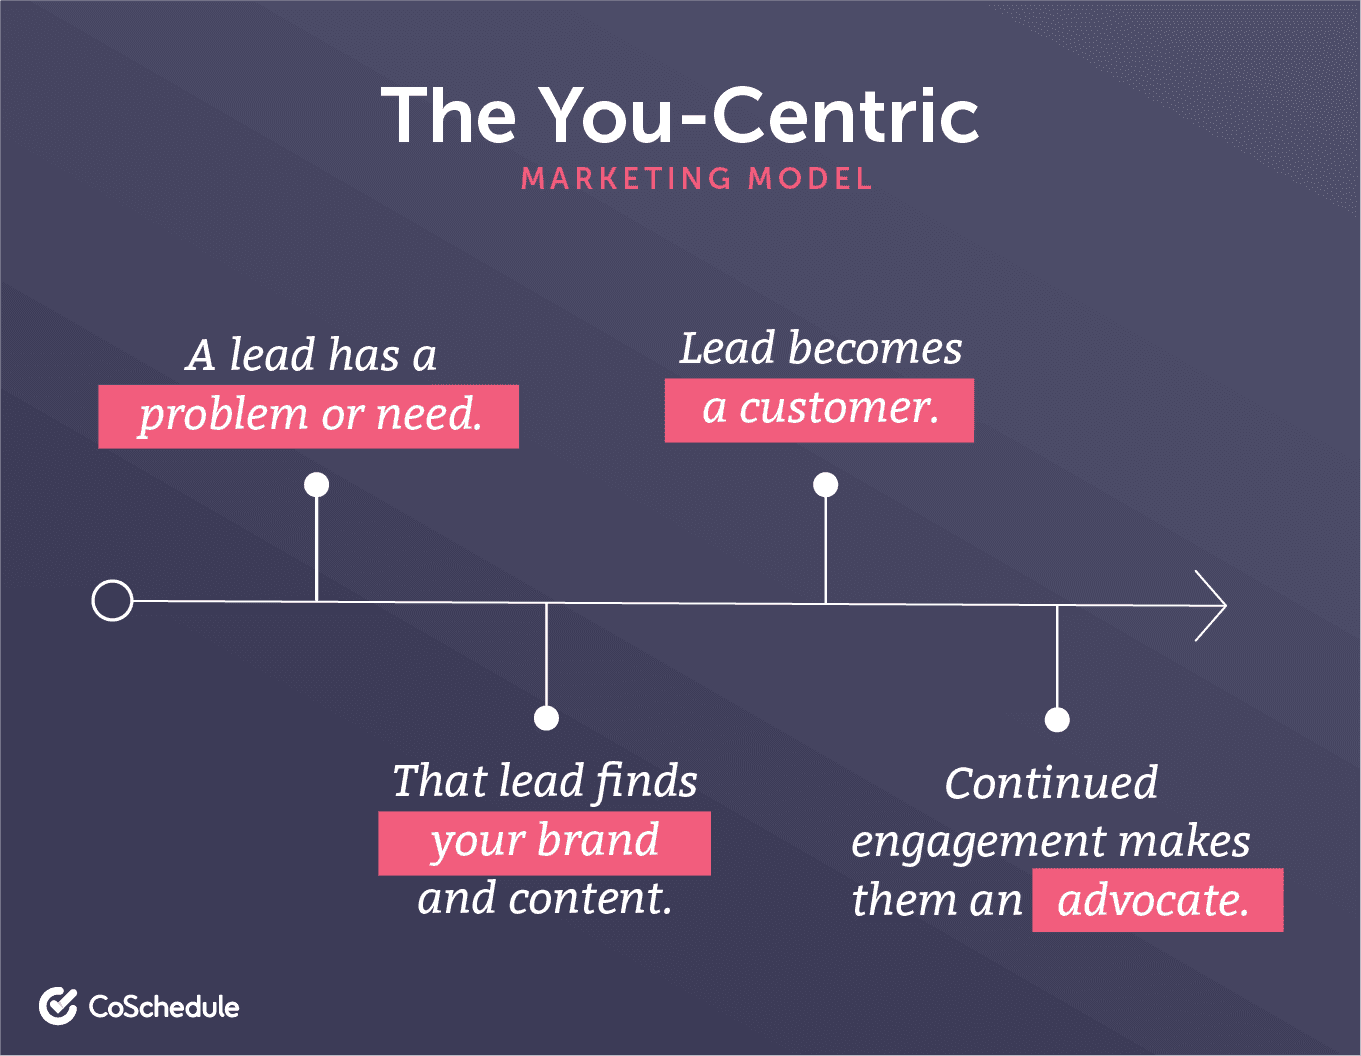 Example of the you-centric marketing model